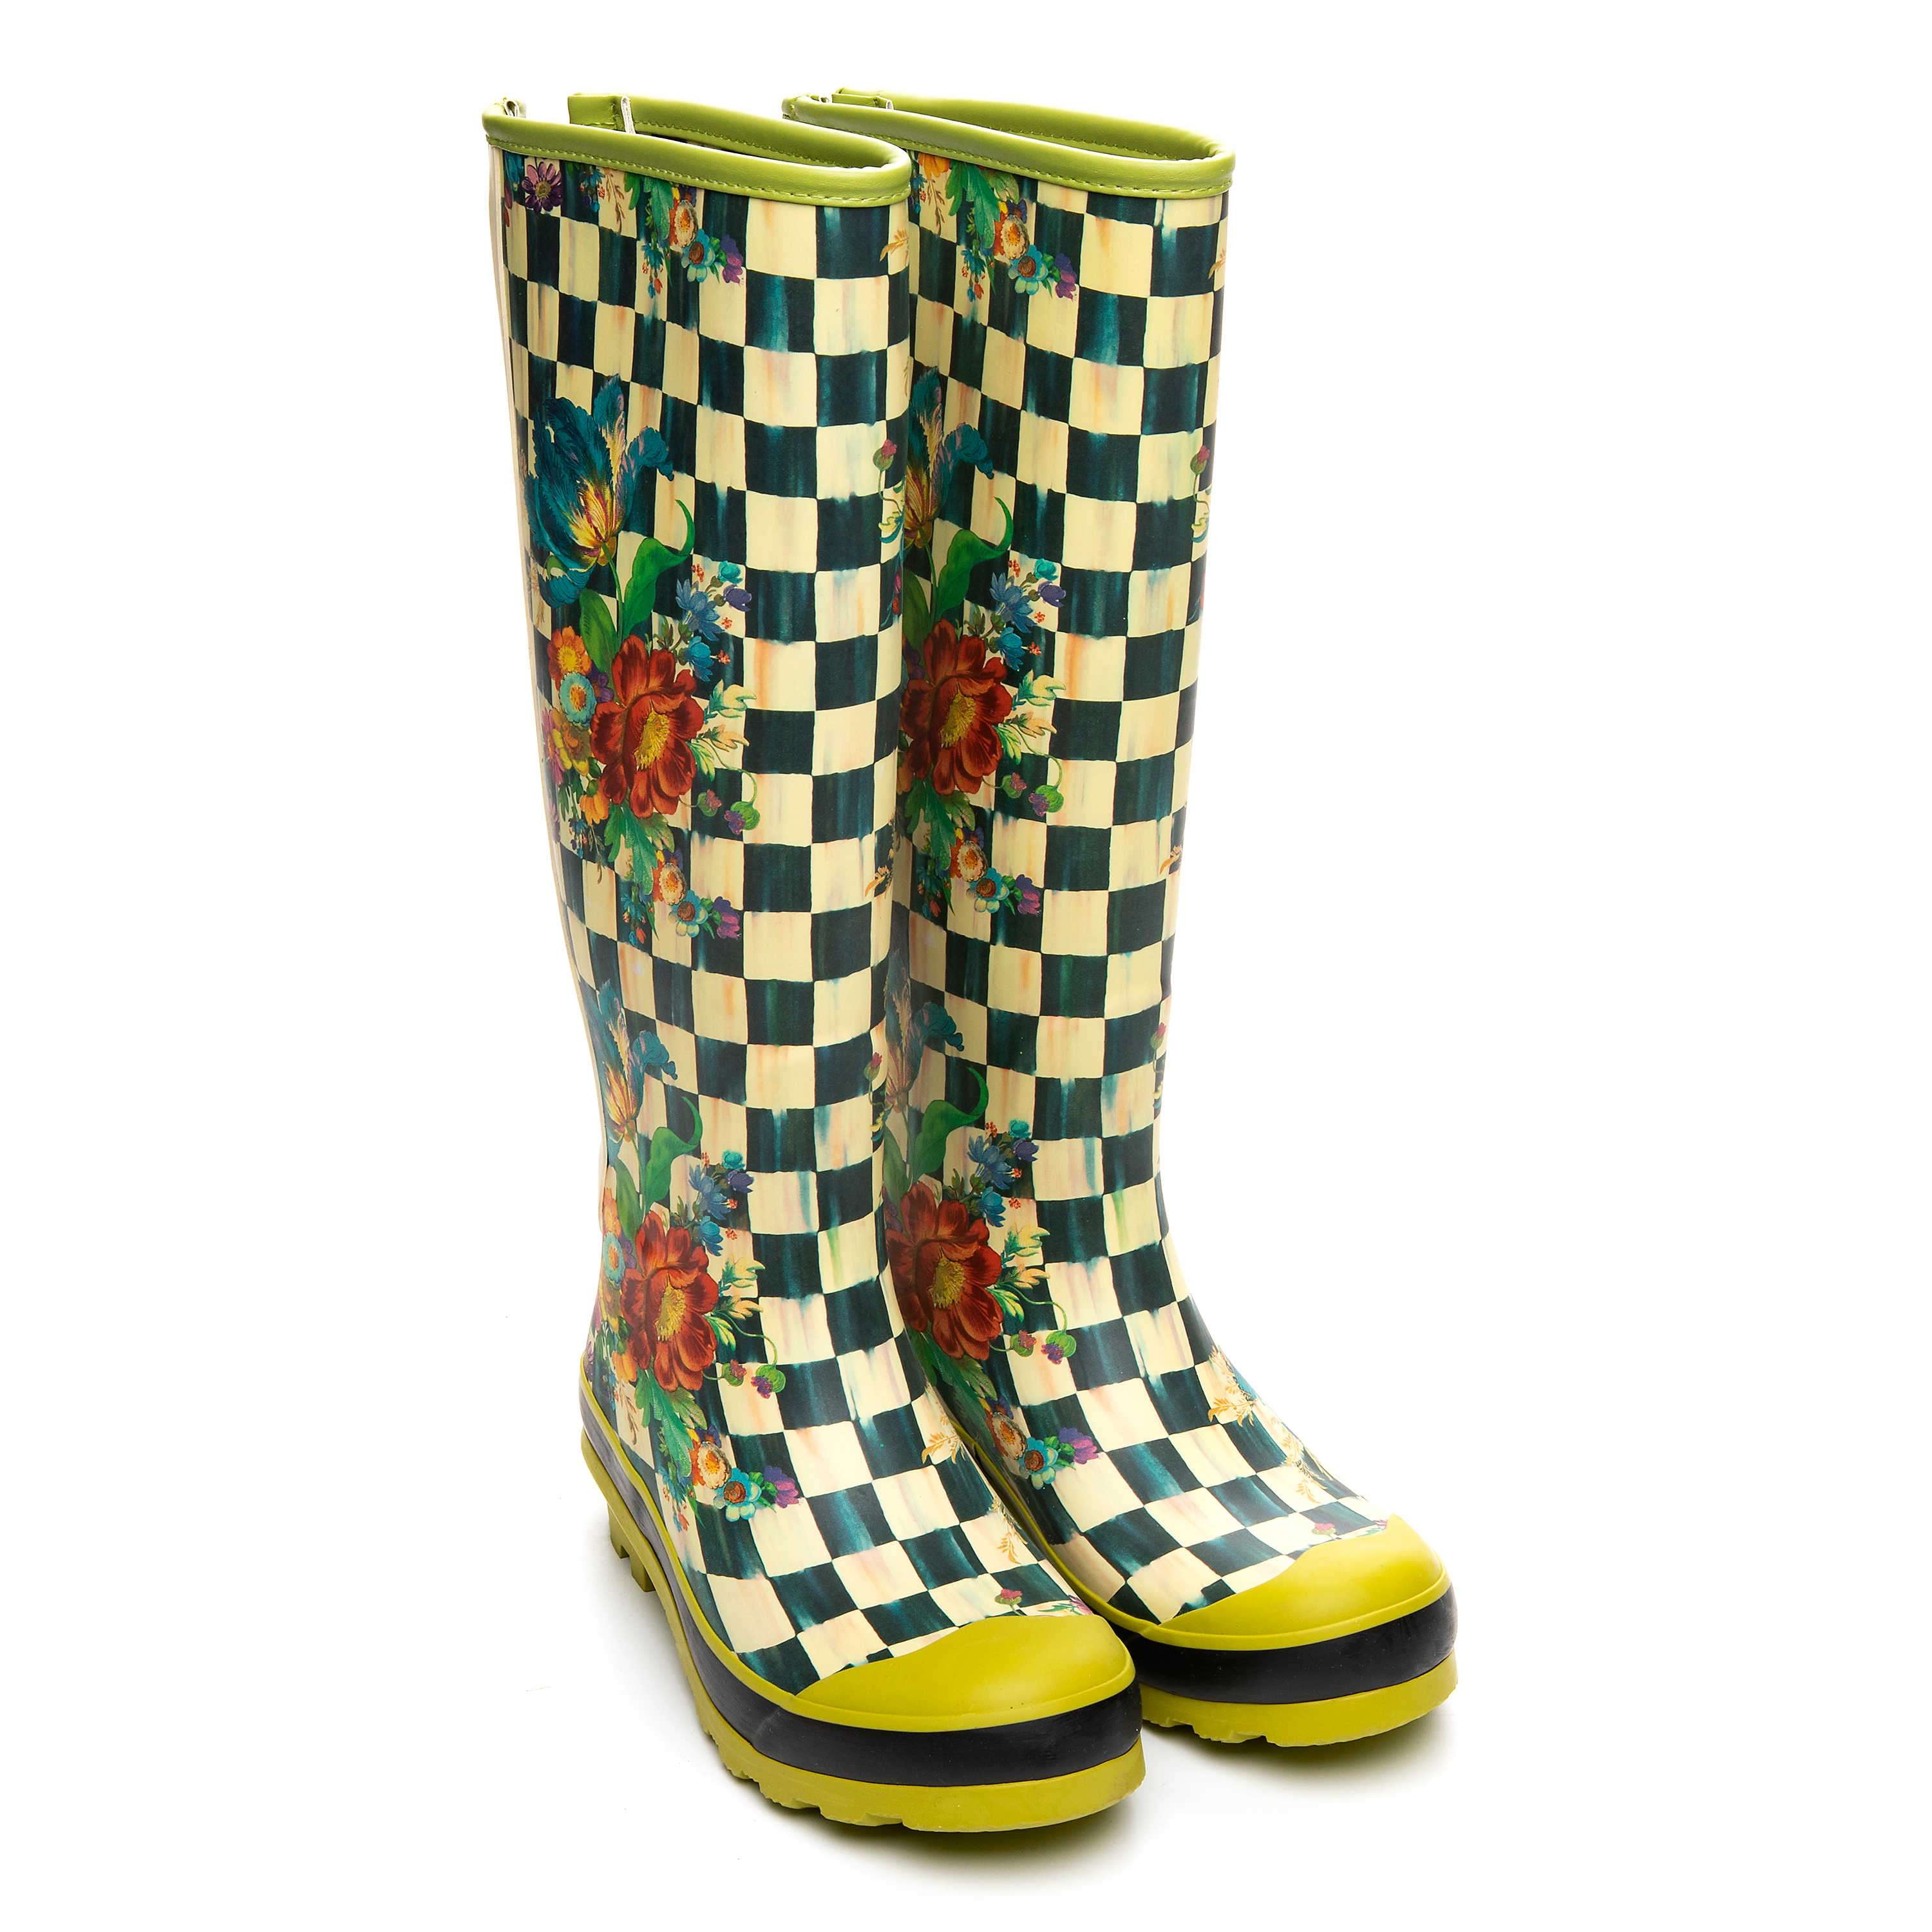 Courtly Check Rain Boots - Tall - Size 7 mackenzie-childs Panama 0